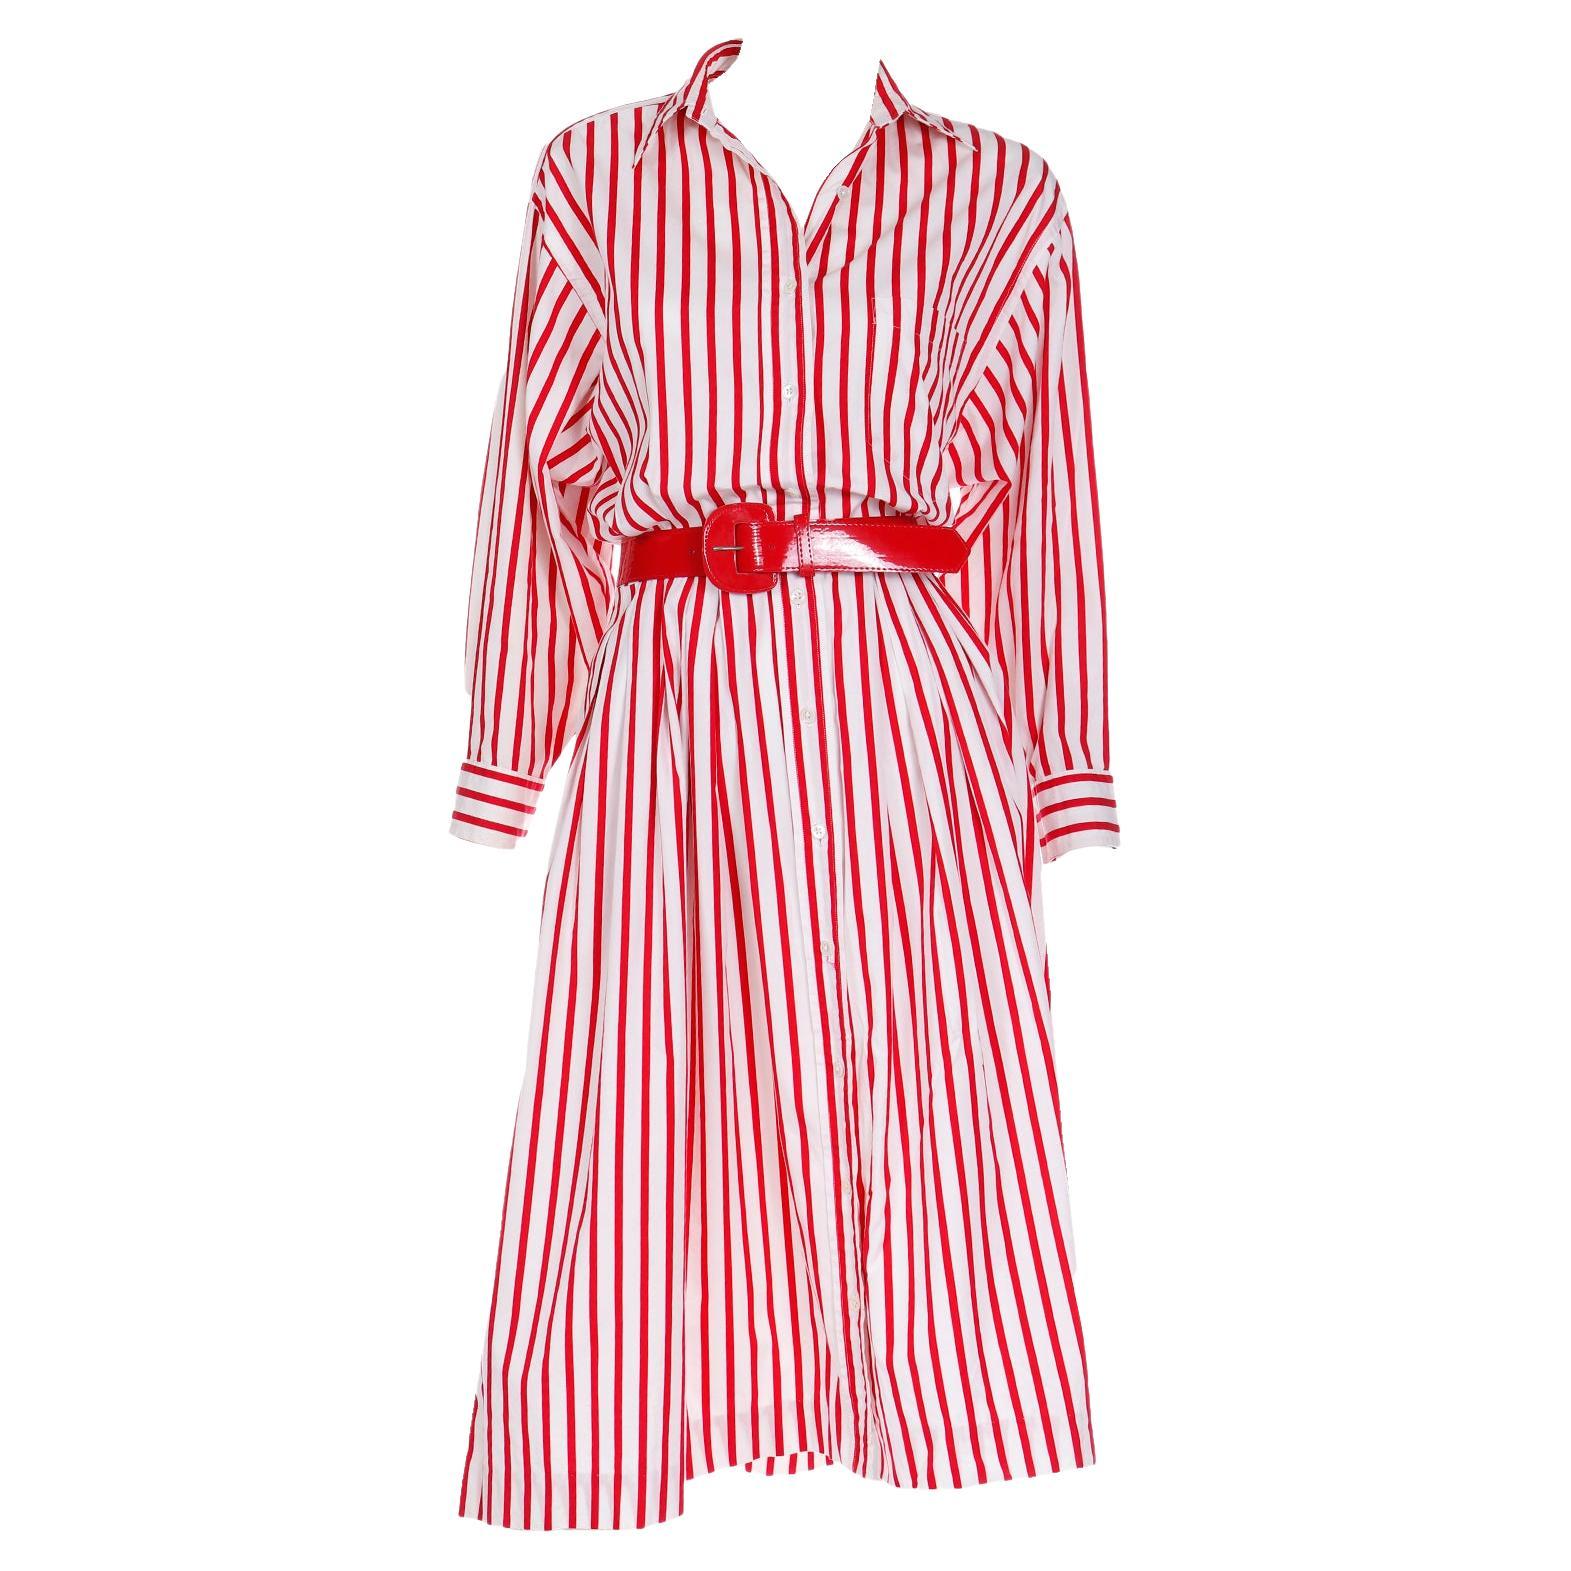 Vintage Ralph Lauren Red & White Striped Shirtdress Style Cotton Day Dress For Sale